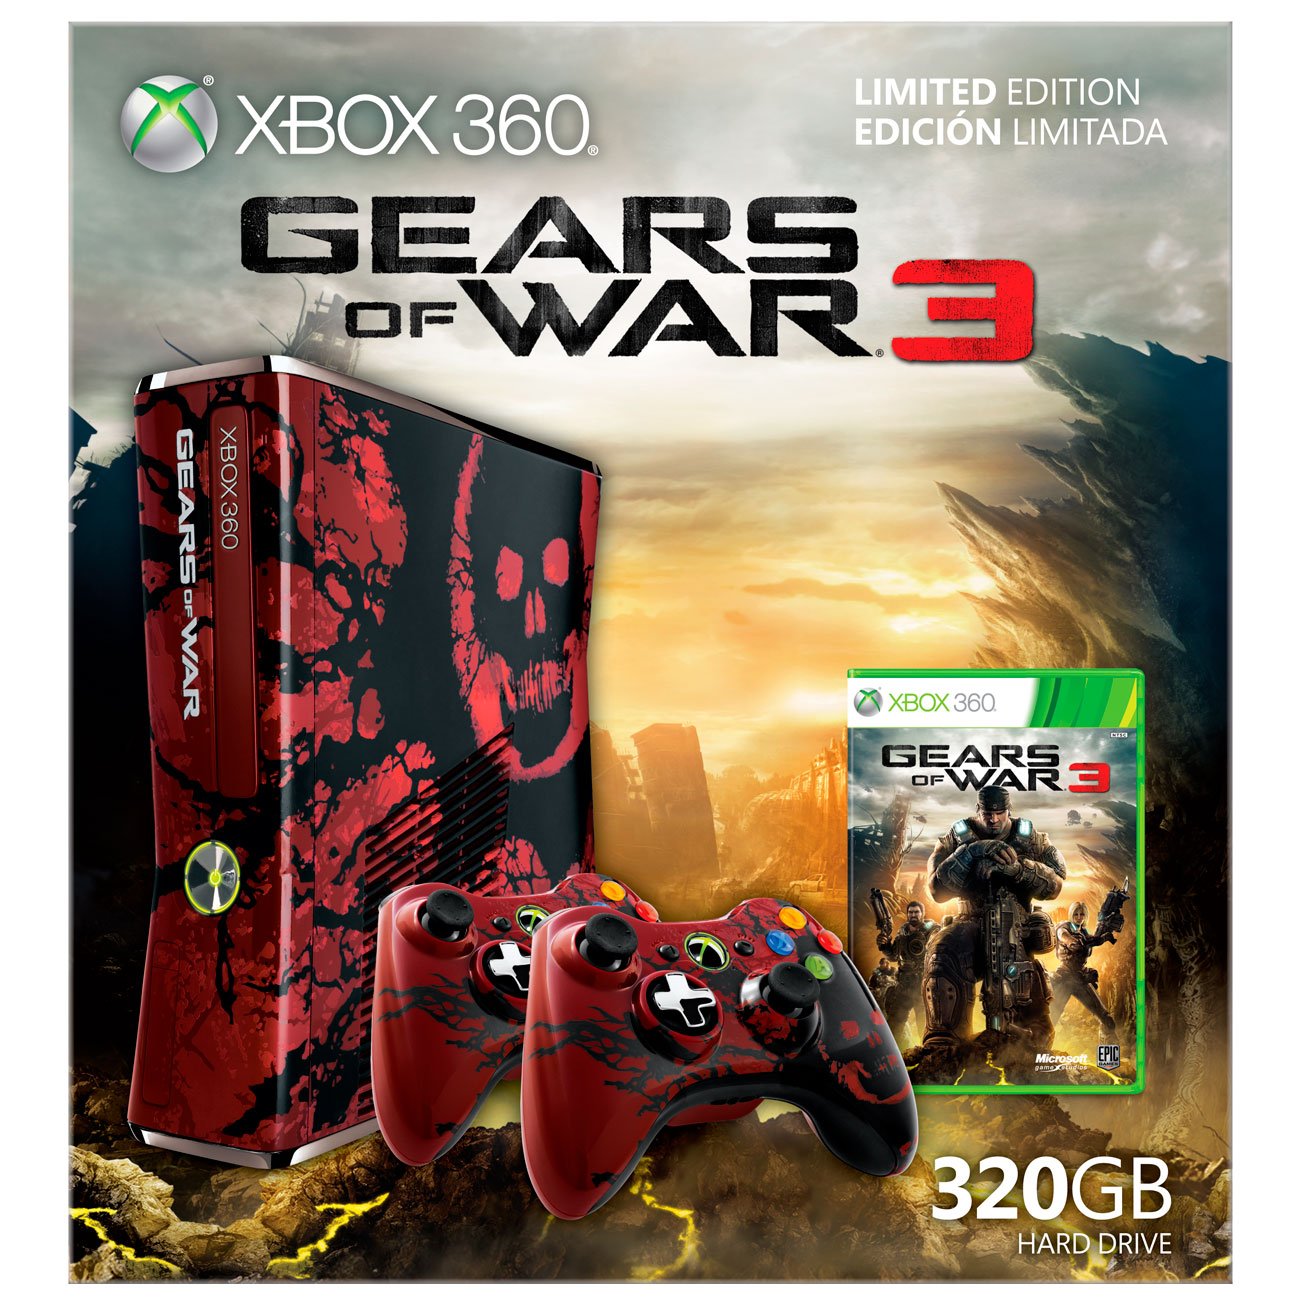 Gears of War 2 Special Edition Xbox 360 Game